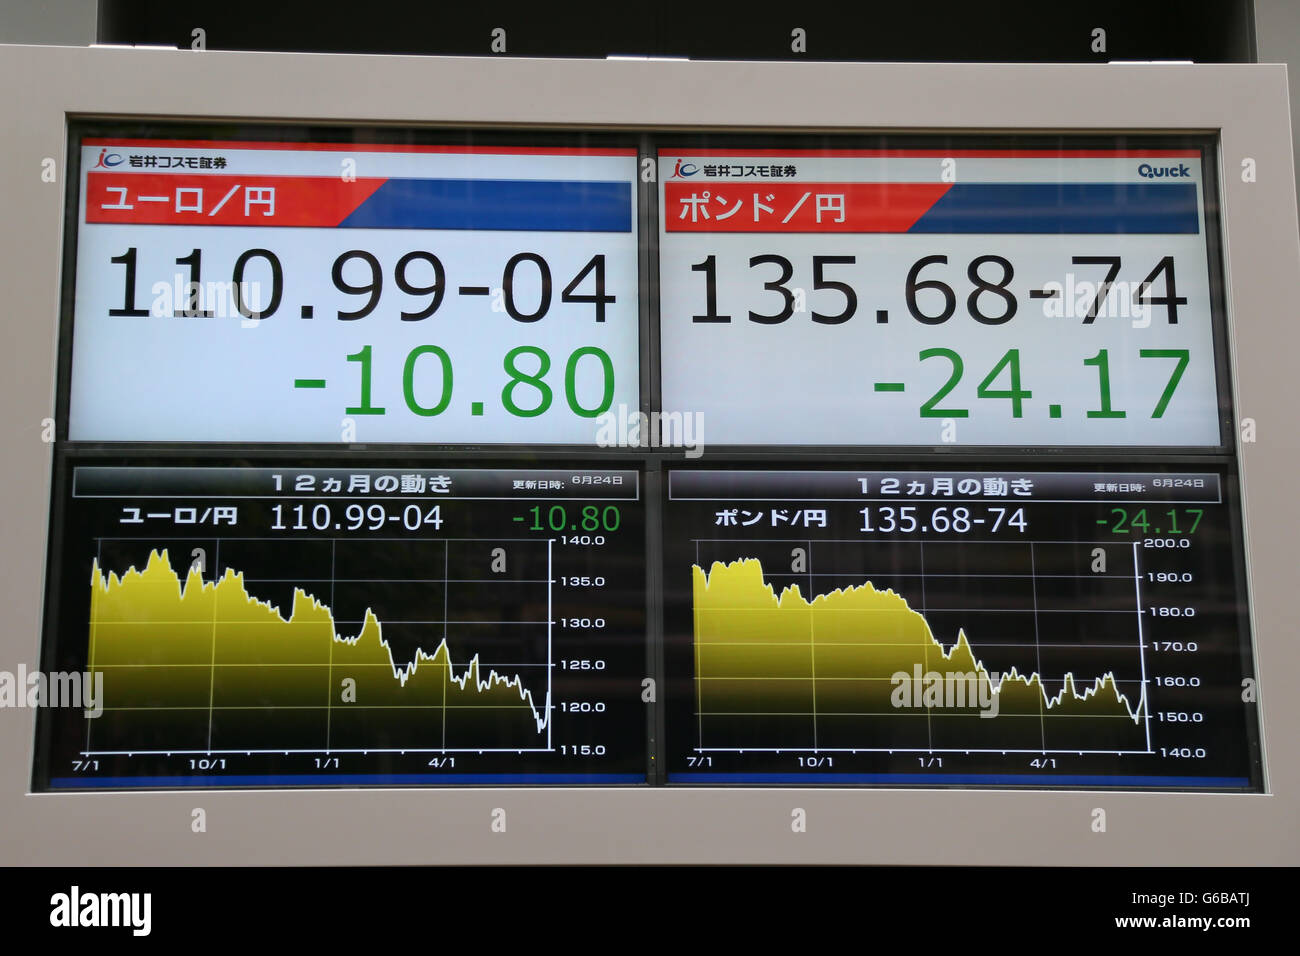 A trading board shows that exchange rates of Japanese yen against euro, left, and British pound on June 24, 2016 in Tokyo, Japan. As it became apparent that British voters would opt to leave the EU, markets across the globe began to tumble. The Nikkei index in Japan fell by over 1000 points, its largest one day drop since the Great East Japan Earthquake and Tsunami of March 2011. The pound also tumbled by over 10 percent against japanese yen. © Yohei Osada/AFLO/Alamy Live News Stock Photo